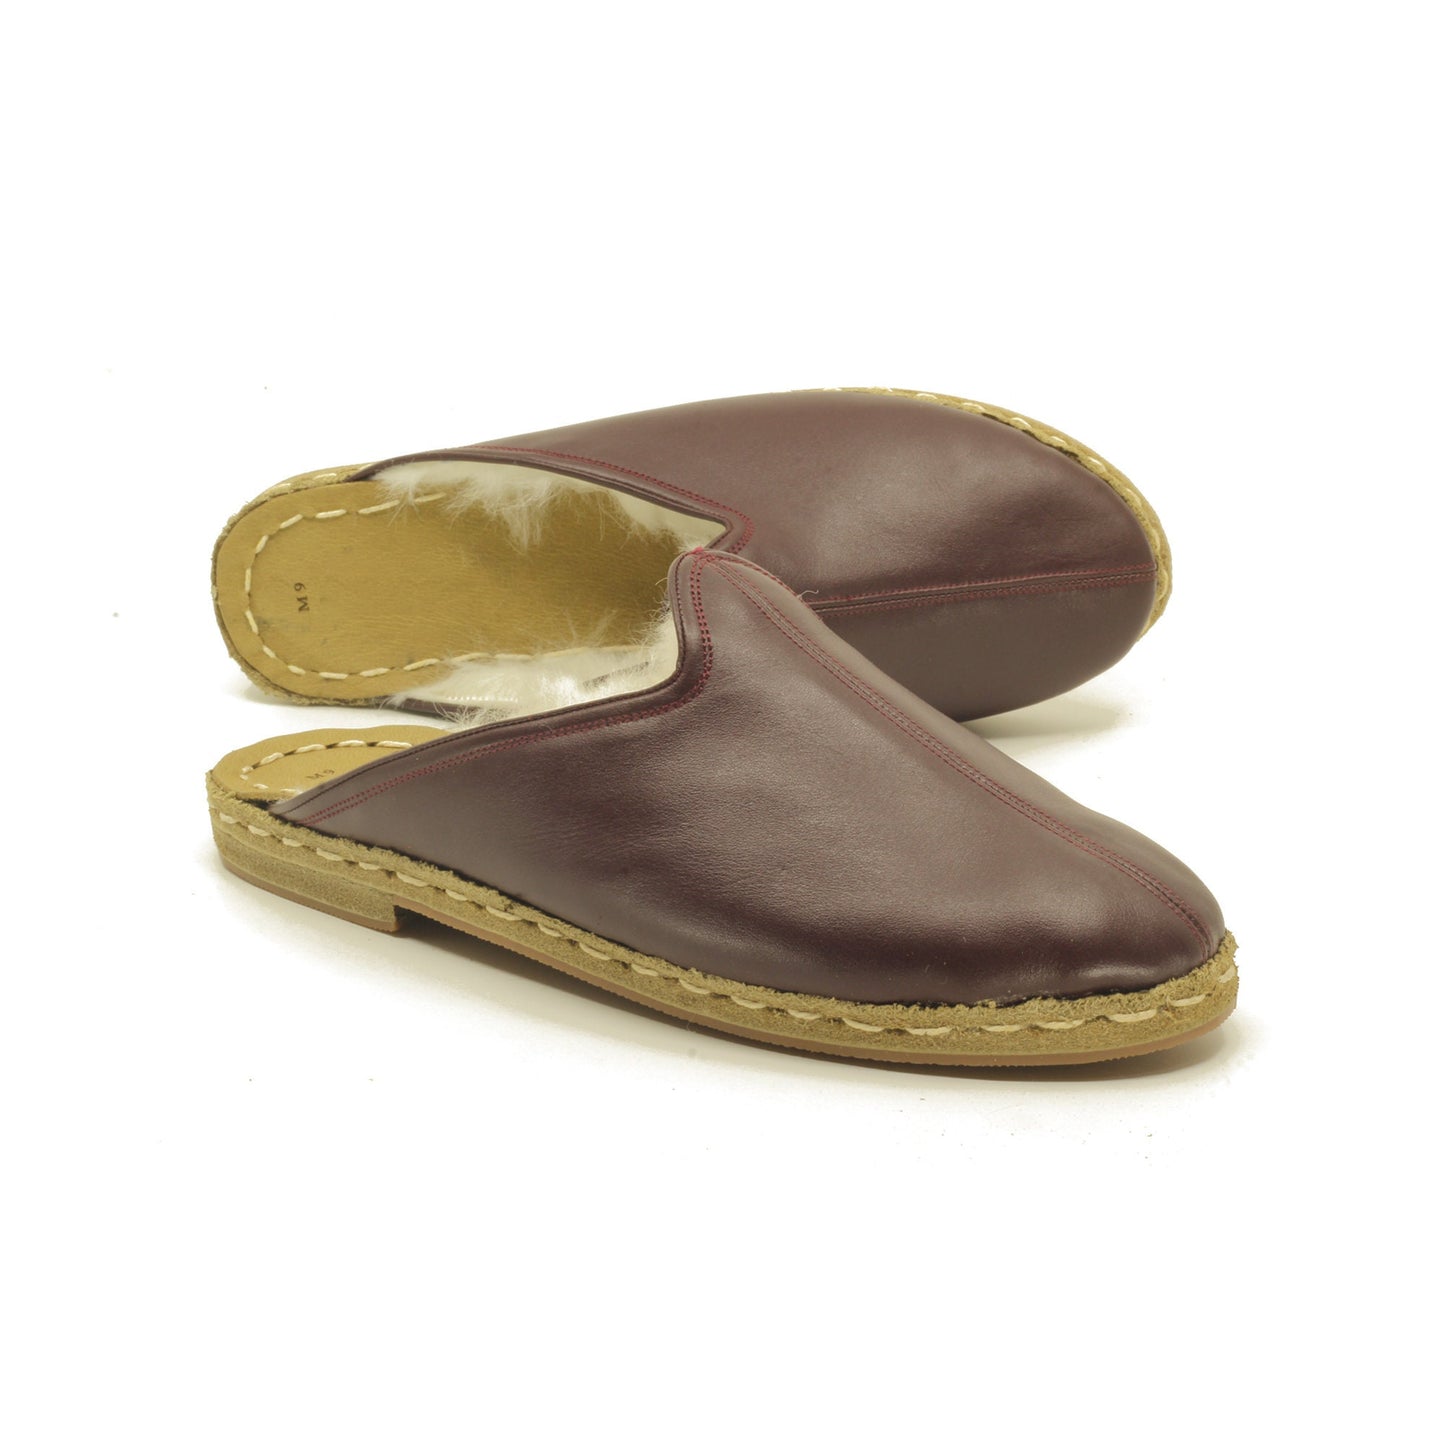 Winter Slippers  - Sheepskin slippers  - Close Toed Slippers - Bitter Brown Leather – Rubber Sole - For Women